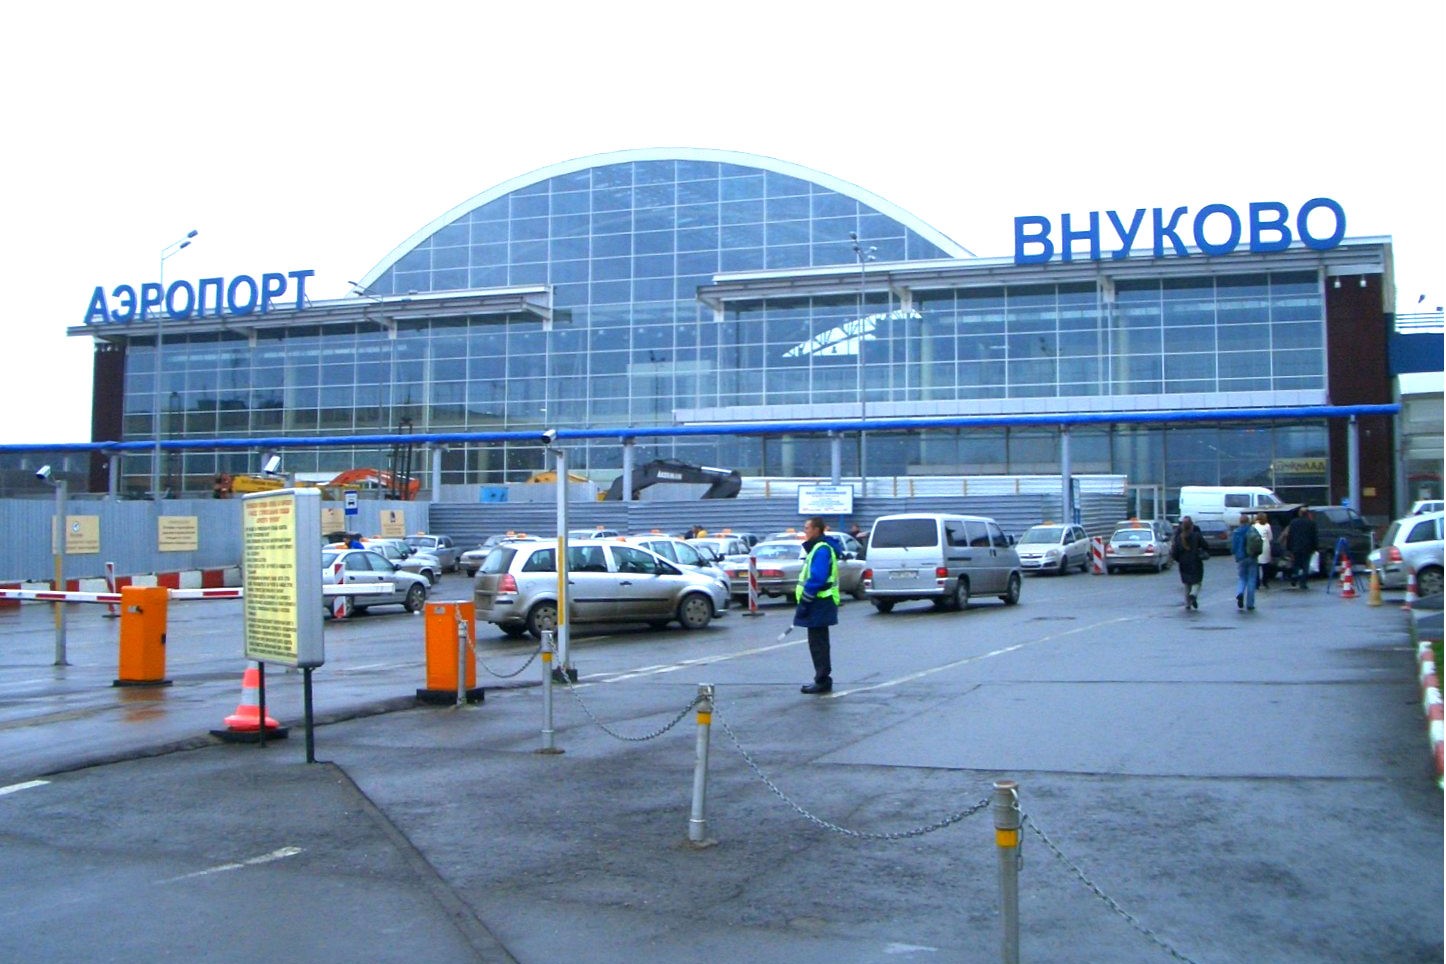 Russia chooses 47 new names for its airports across the country